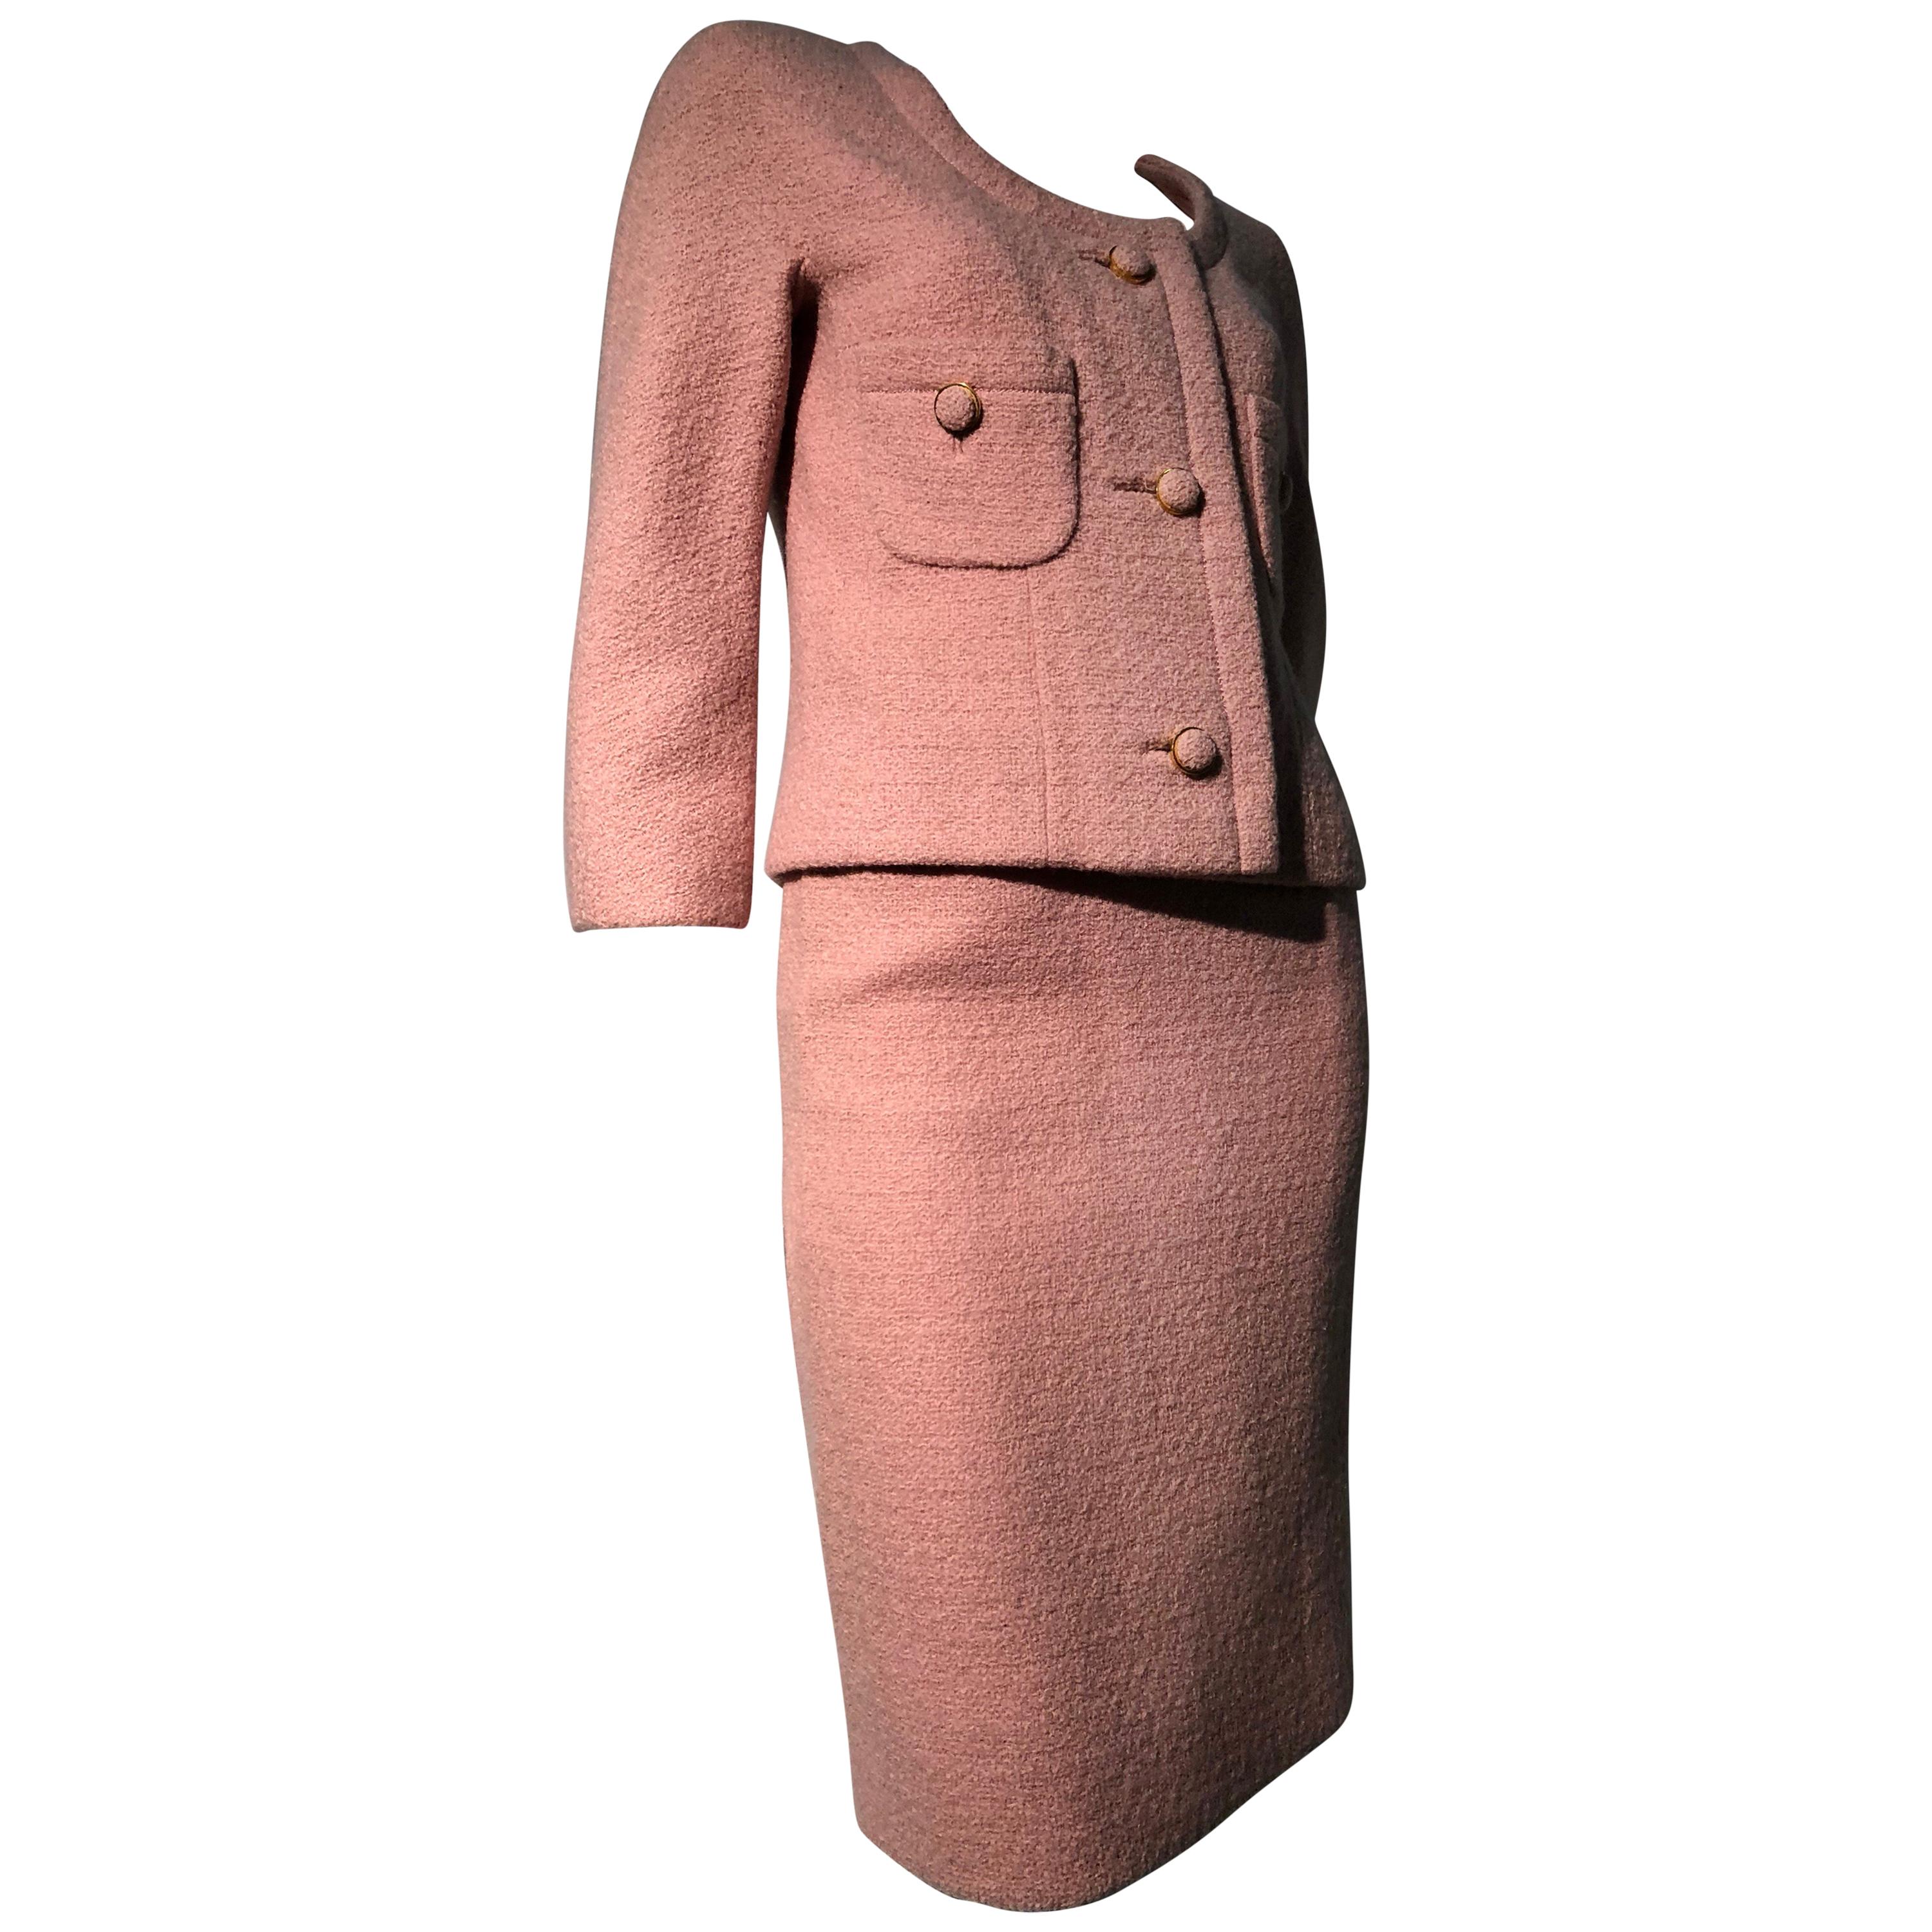 1960s Christian Dior Dusty Rose Spring Weight Wool Bouclé Mini Skirt Suit